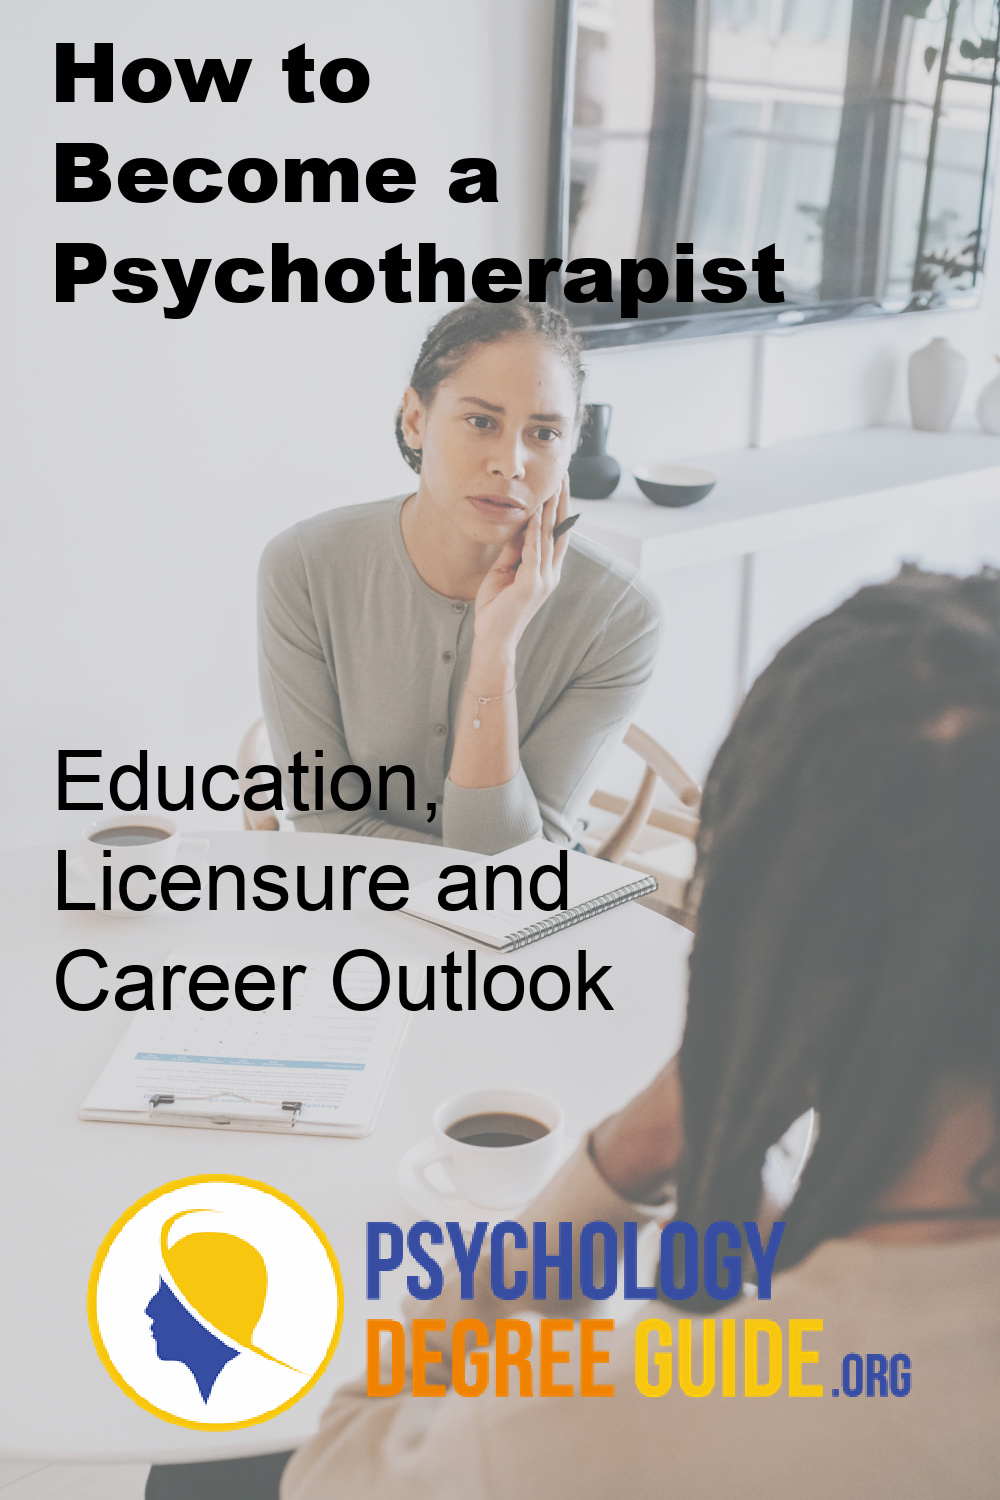 How to
Become a Psychotherapist